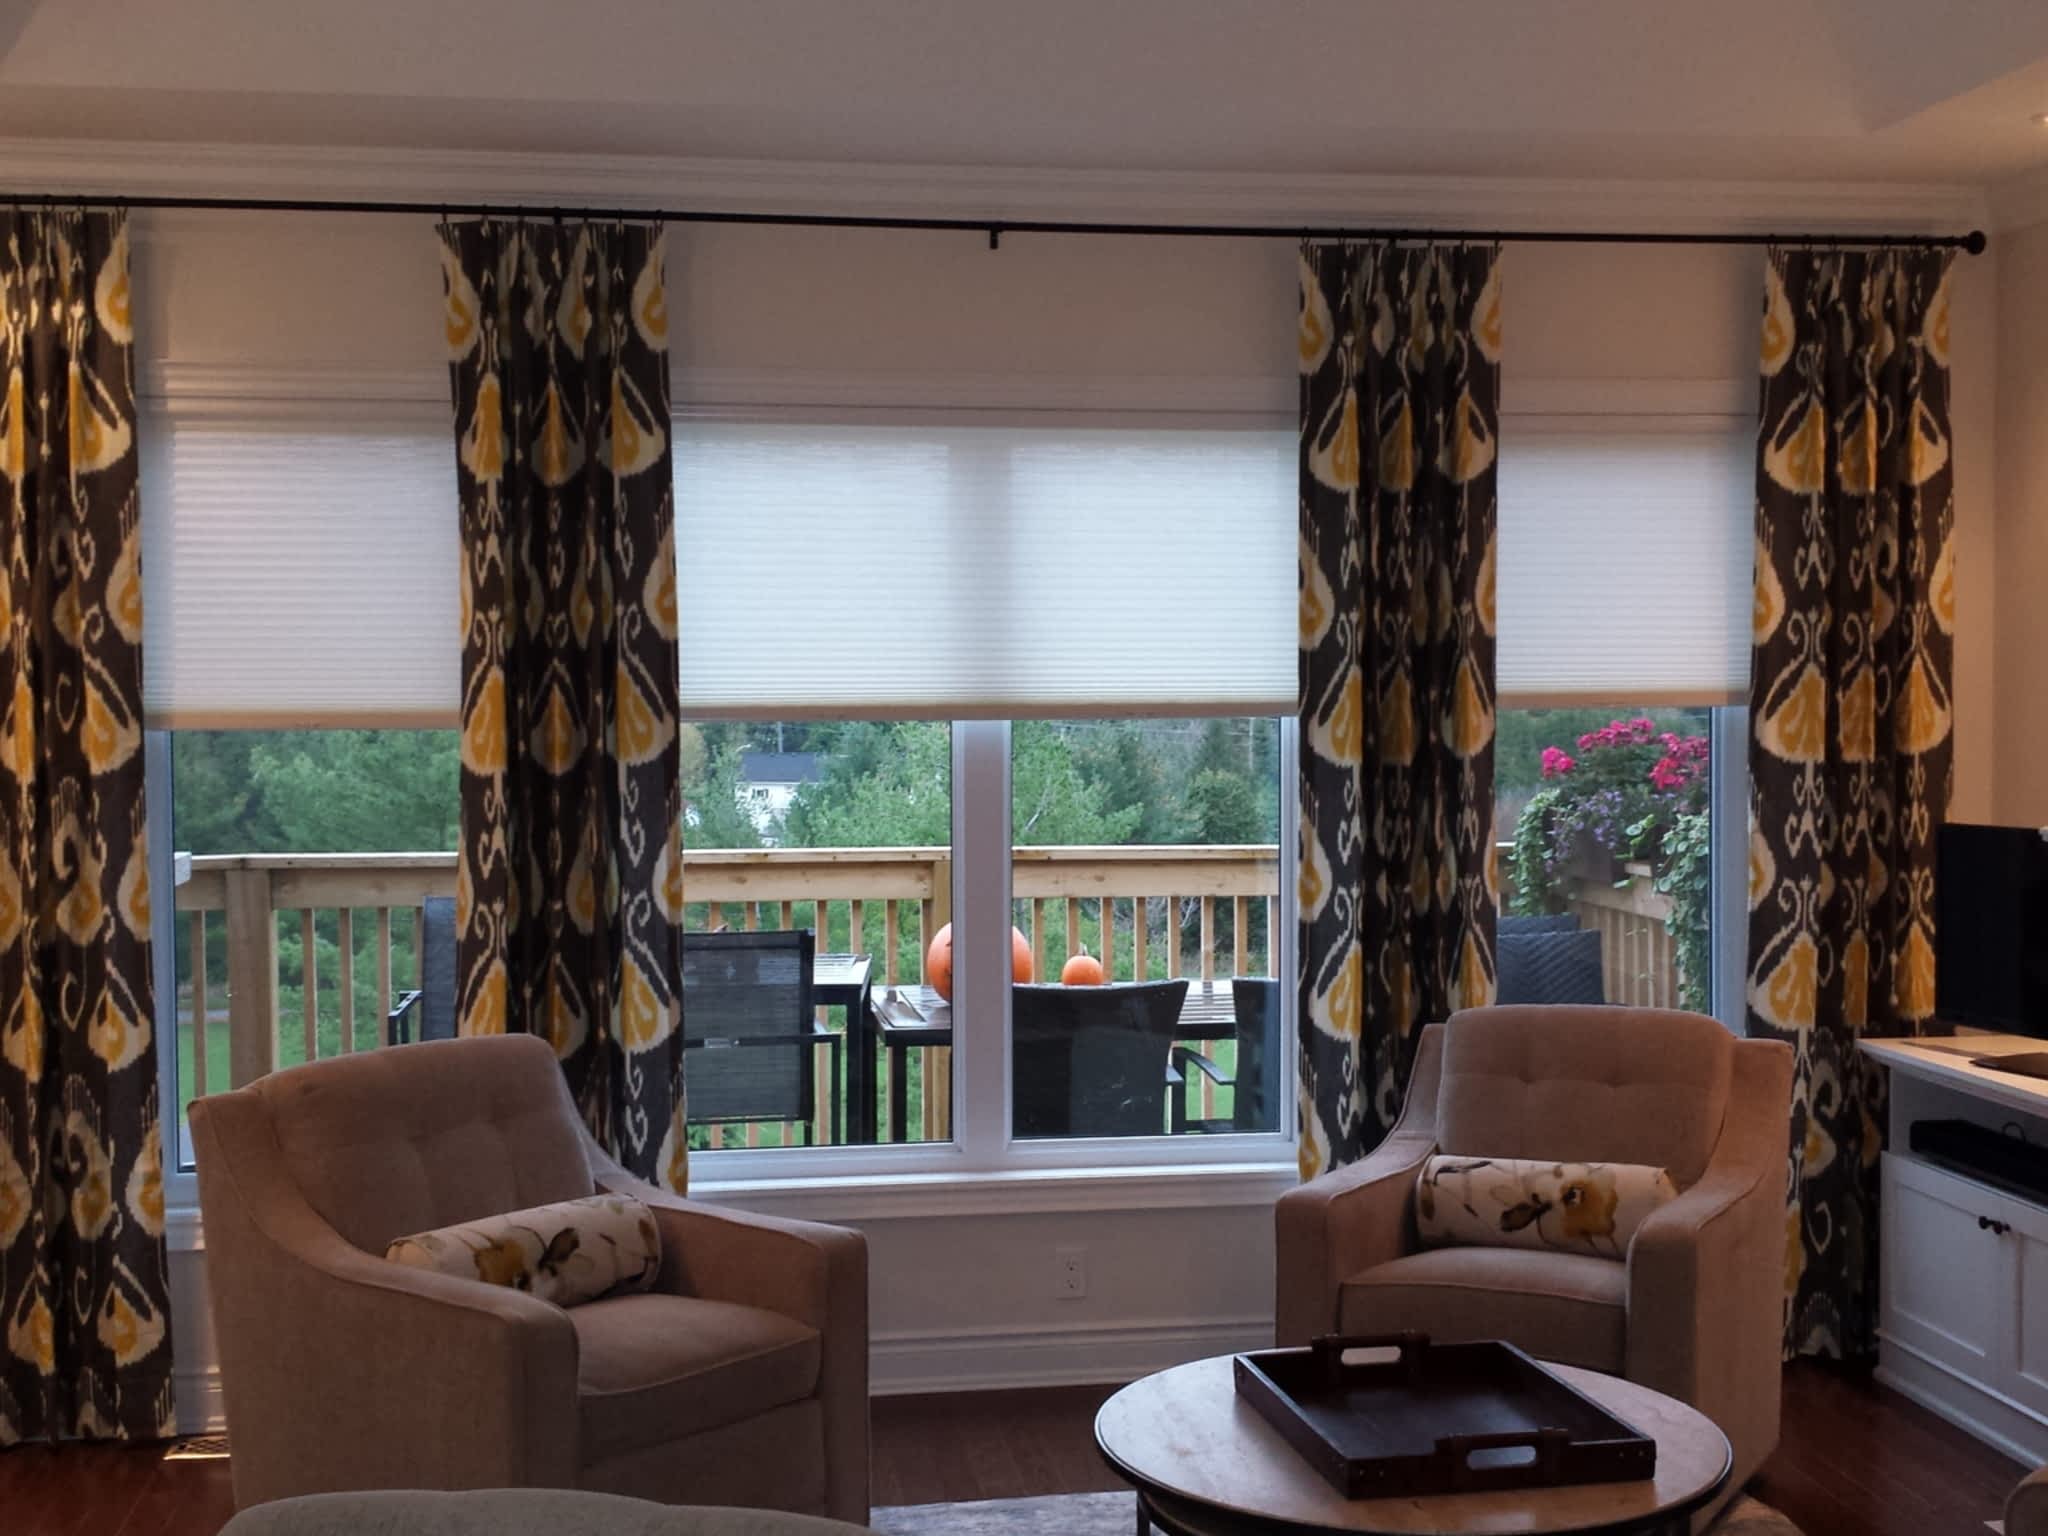 photo Budget Blinds of Bolton & Newmarket